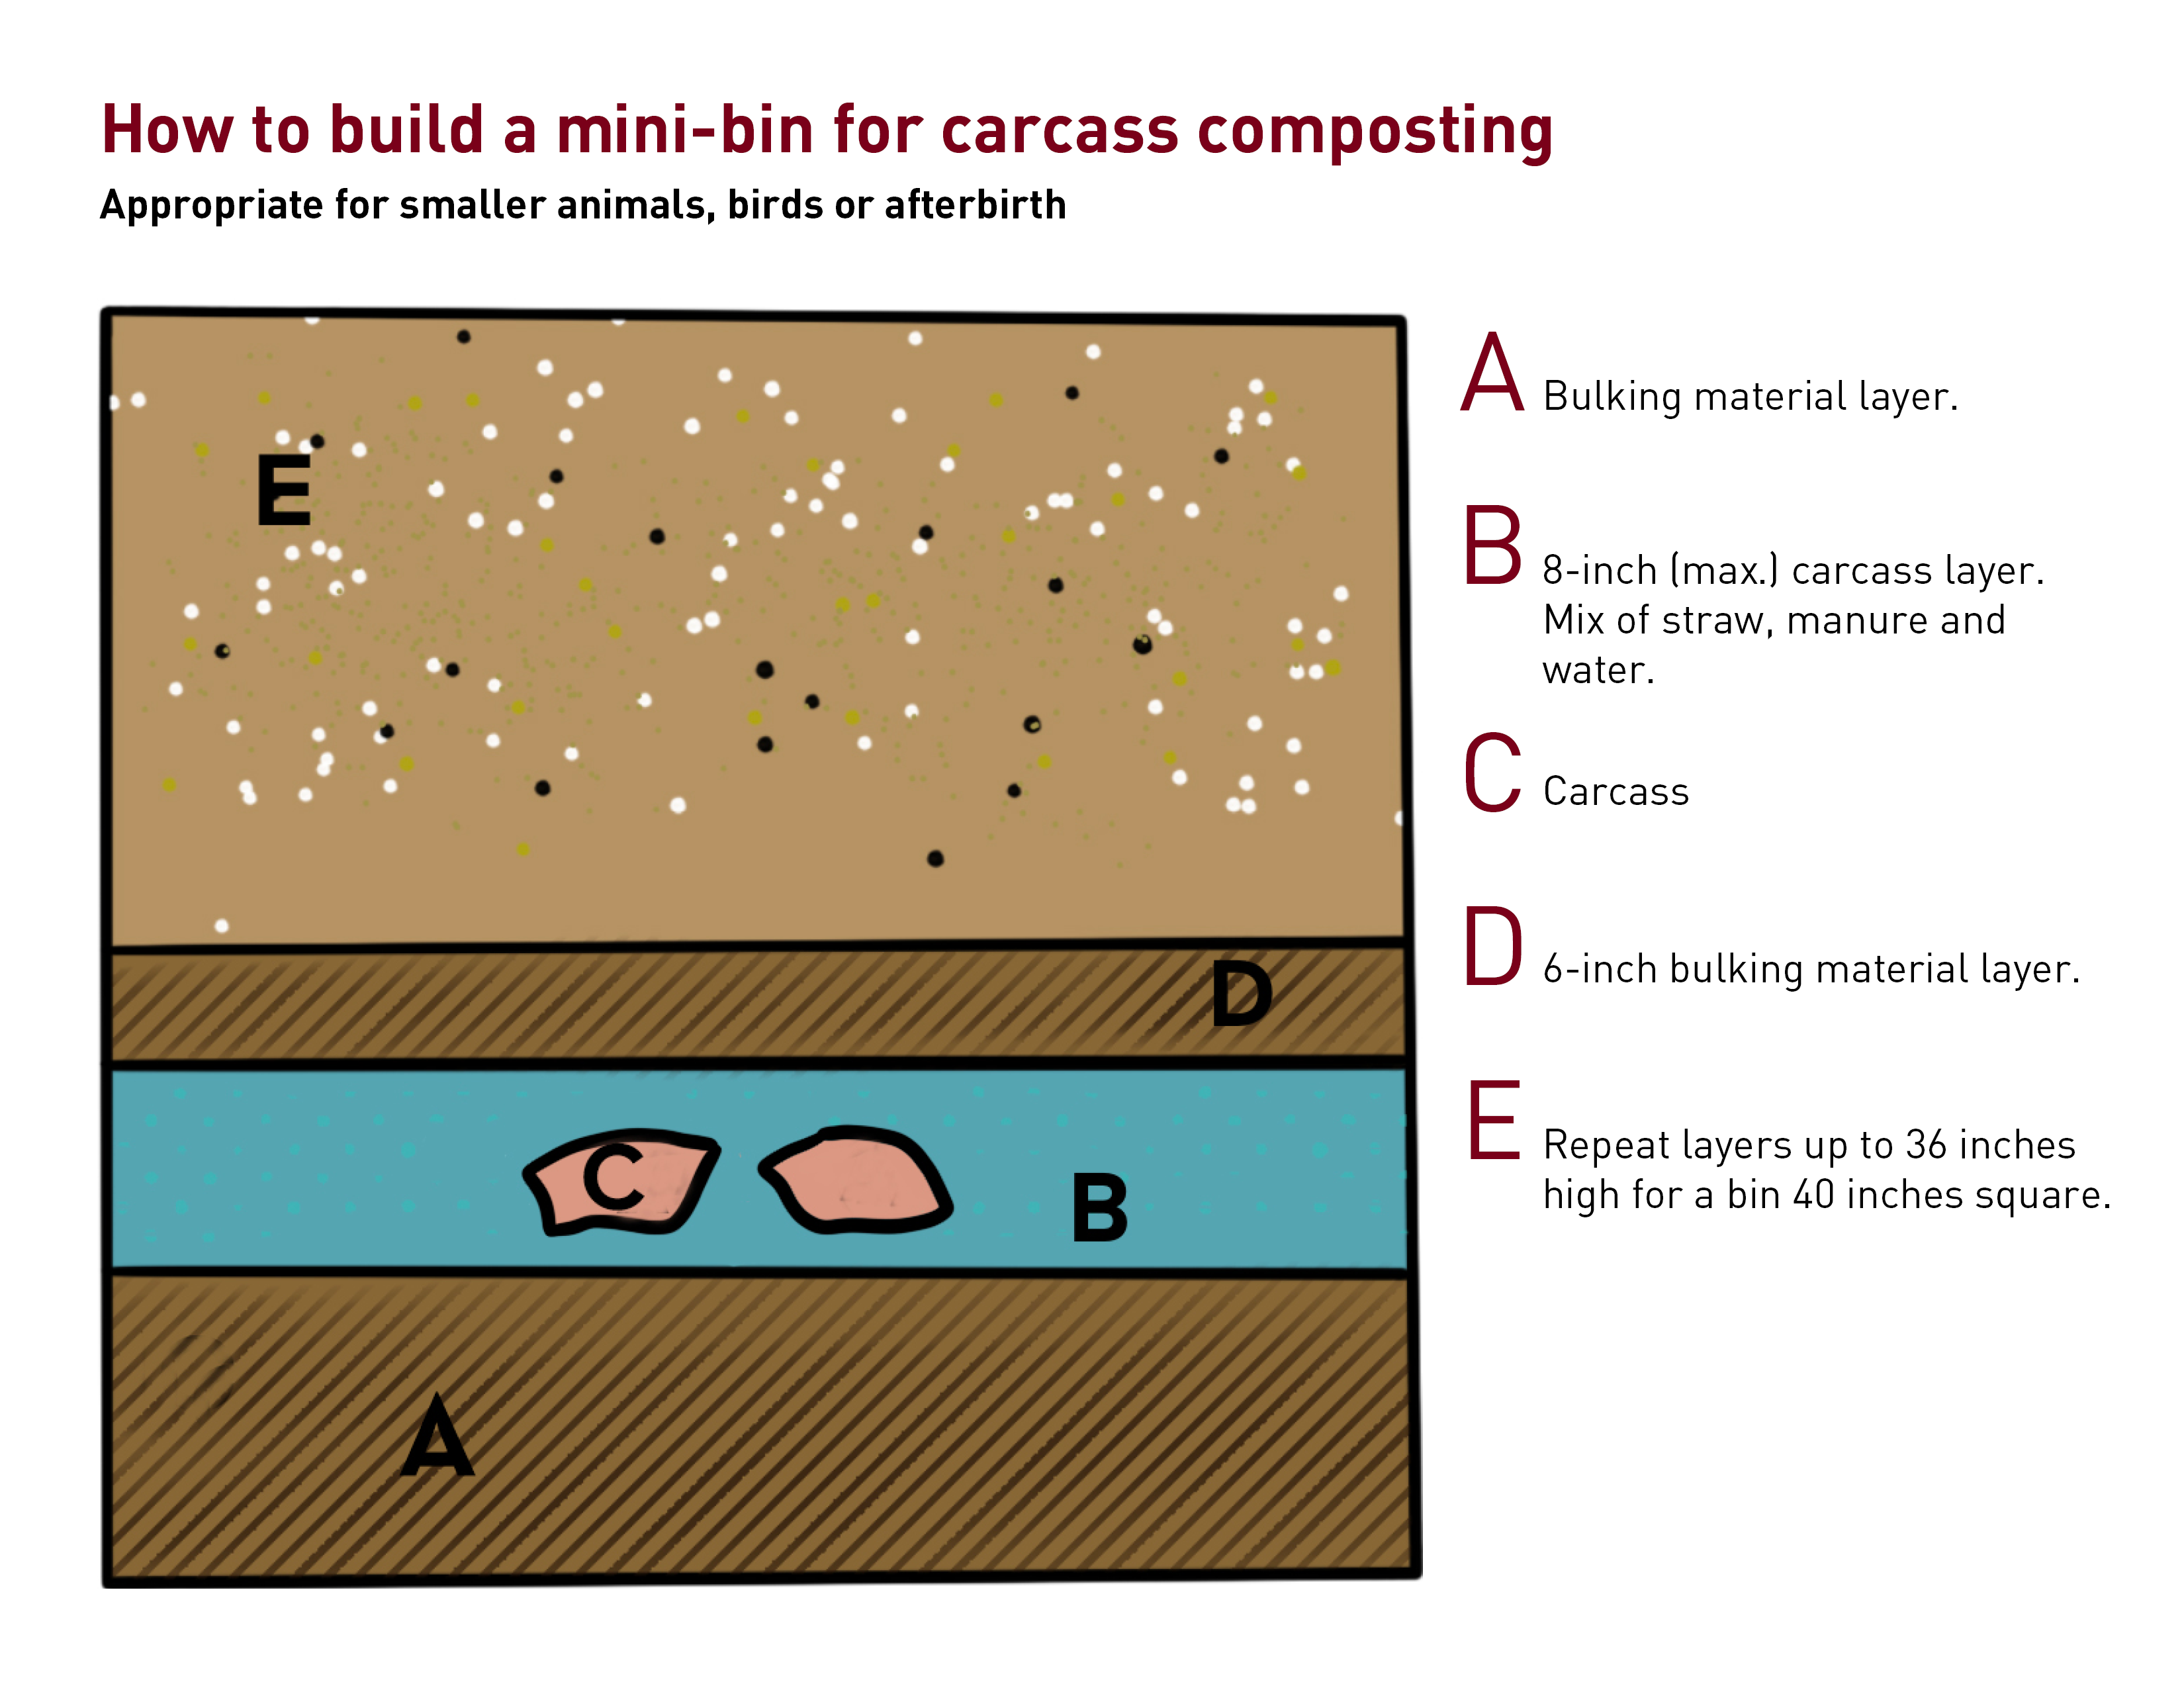 Diagram of the layers of a mini-bin for composting animals and animal parts.